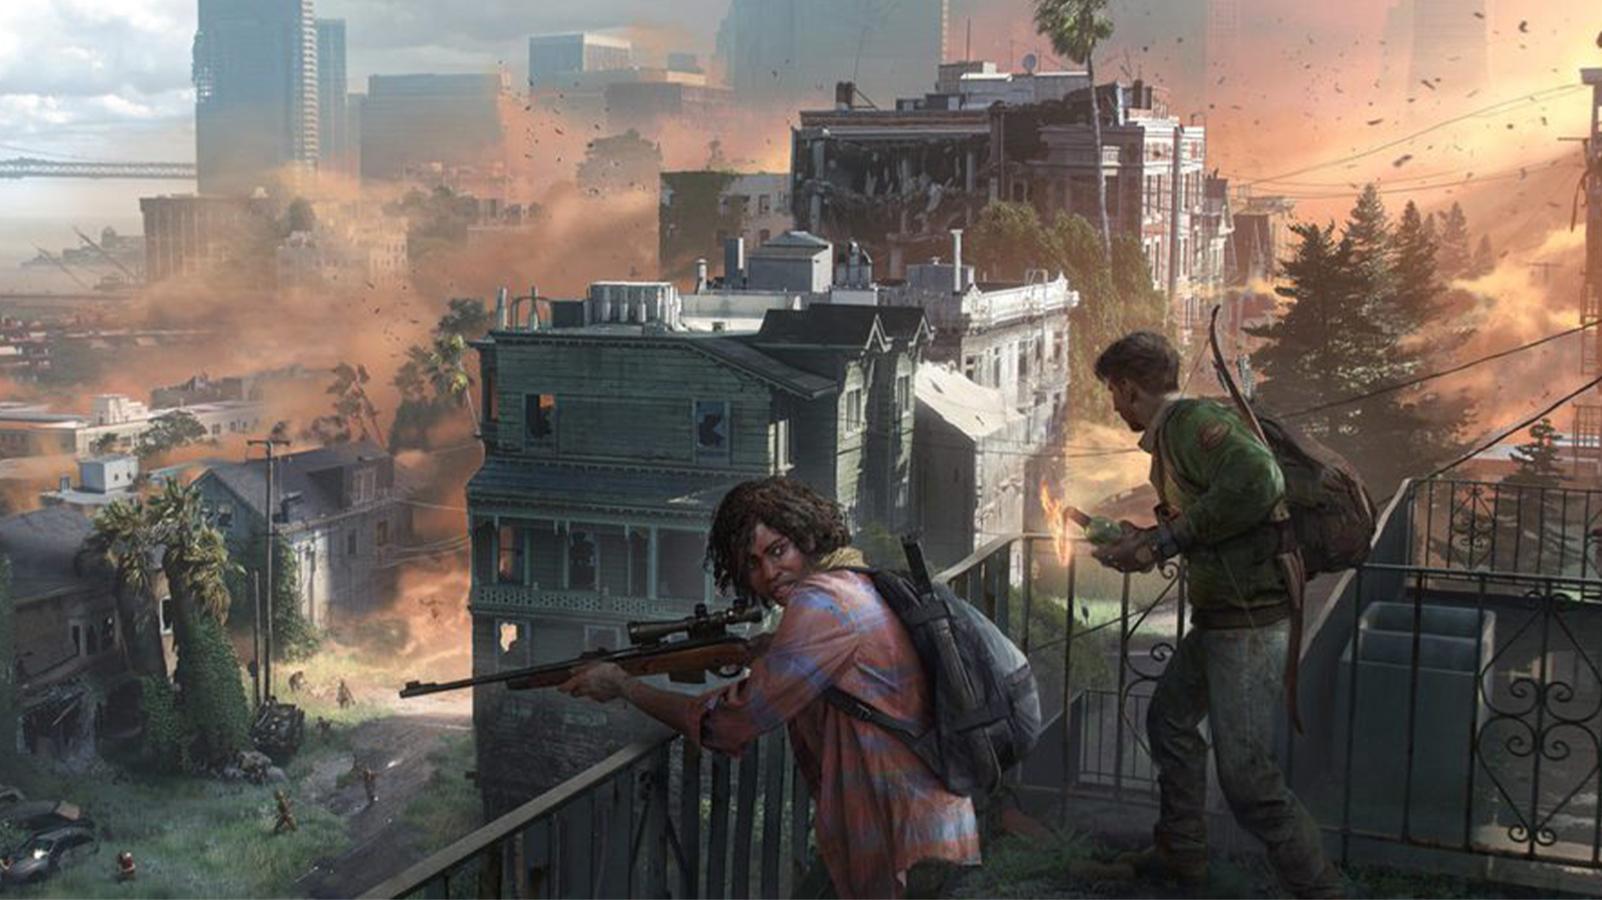 The Last of Us viewership continues to rise after Episode 4 premiere - Xfire